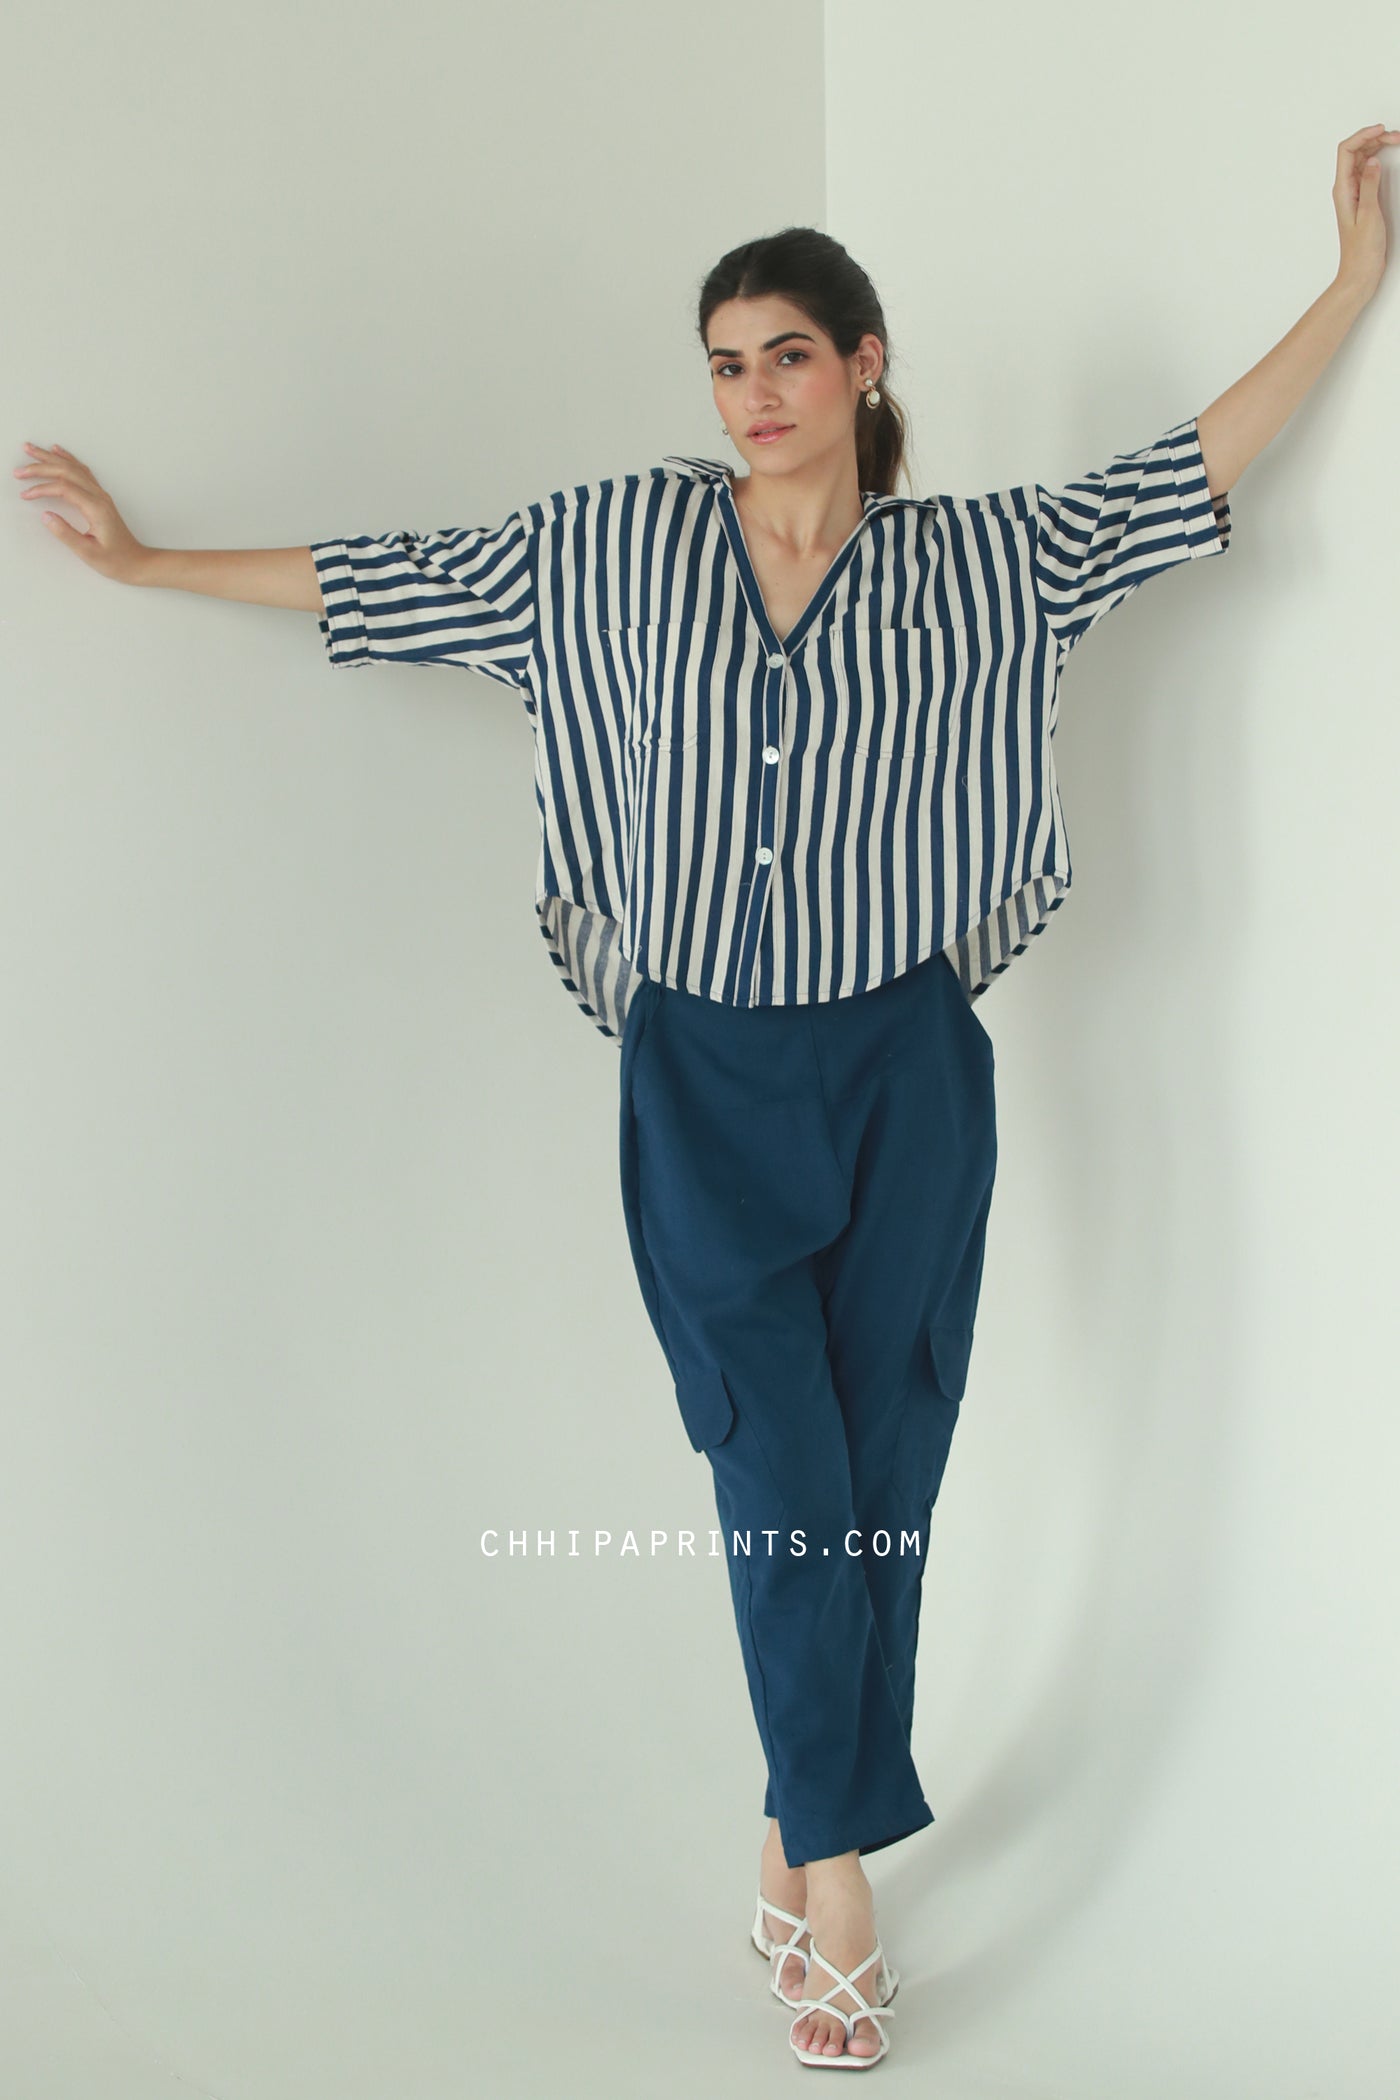 Cotton Stripes Print Relax Fit Shirt in Navy Blue